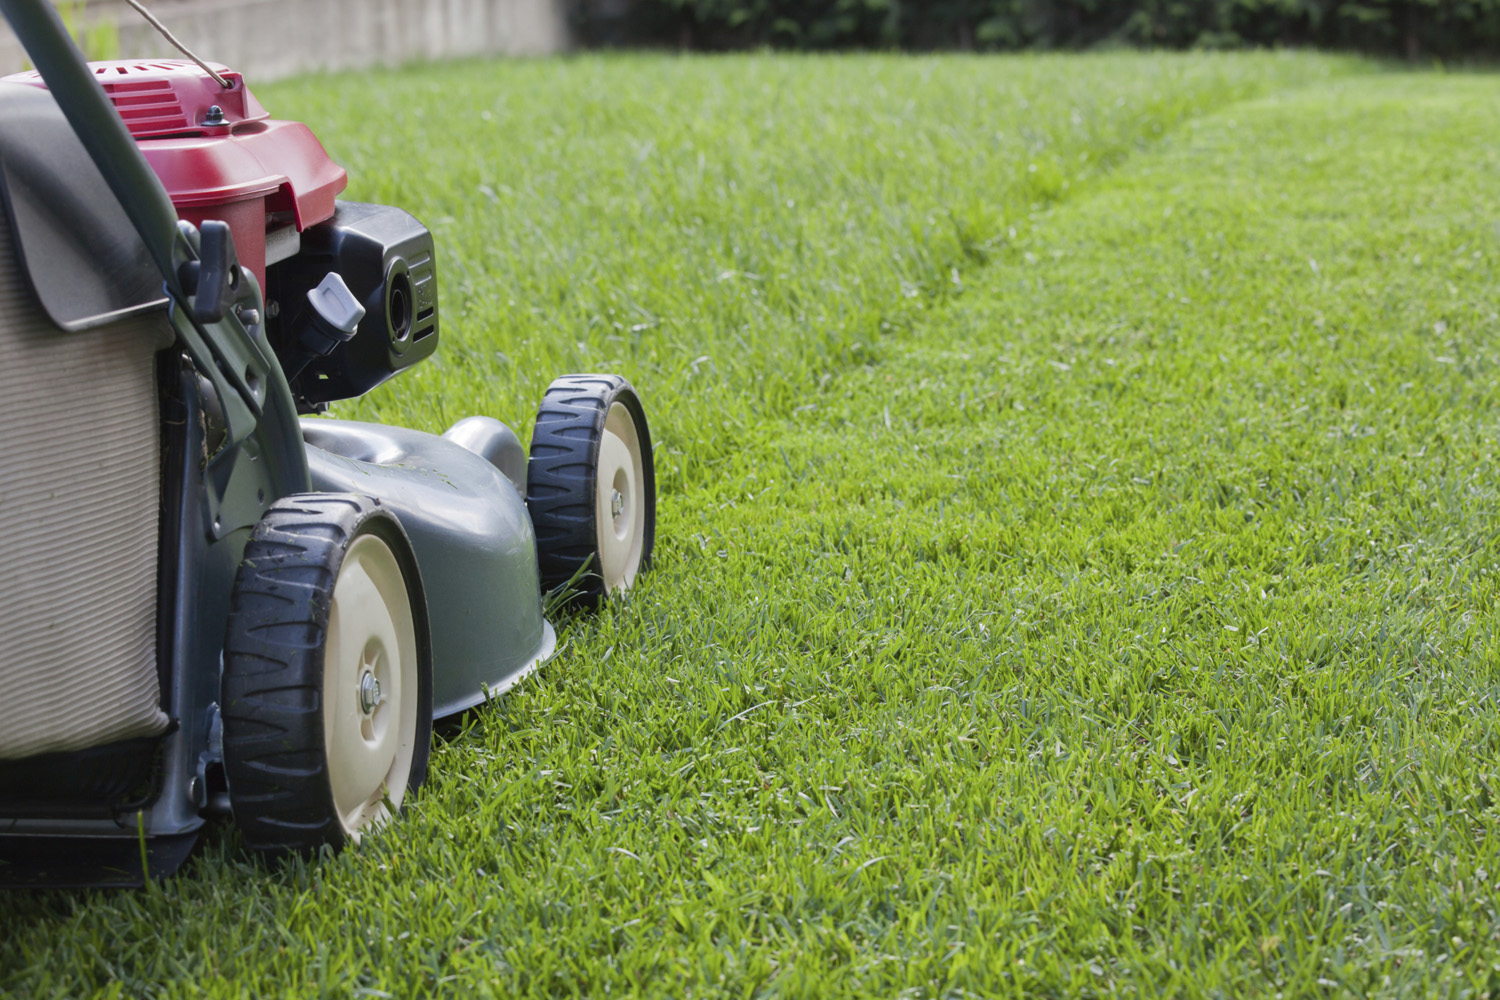 super bowl groundskeepers share lawn care tips - american